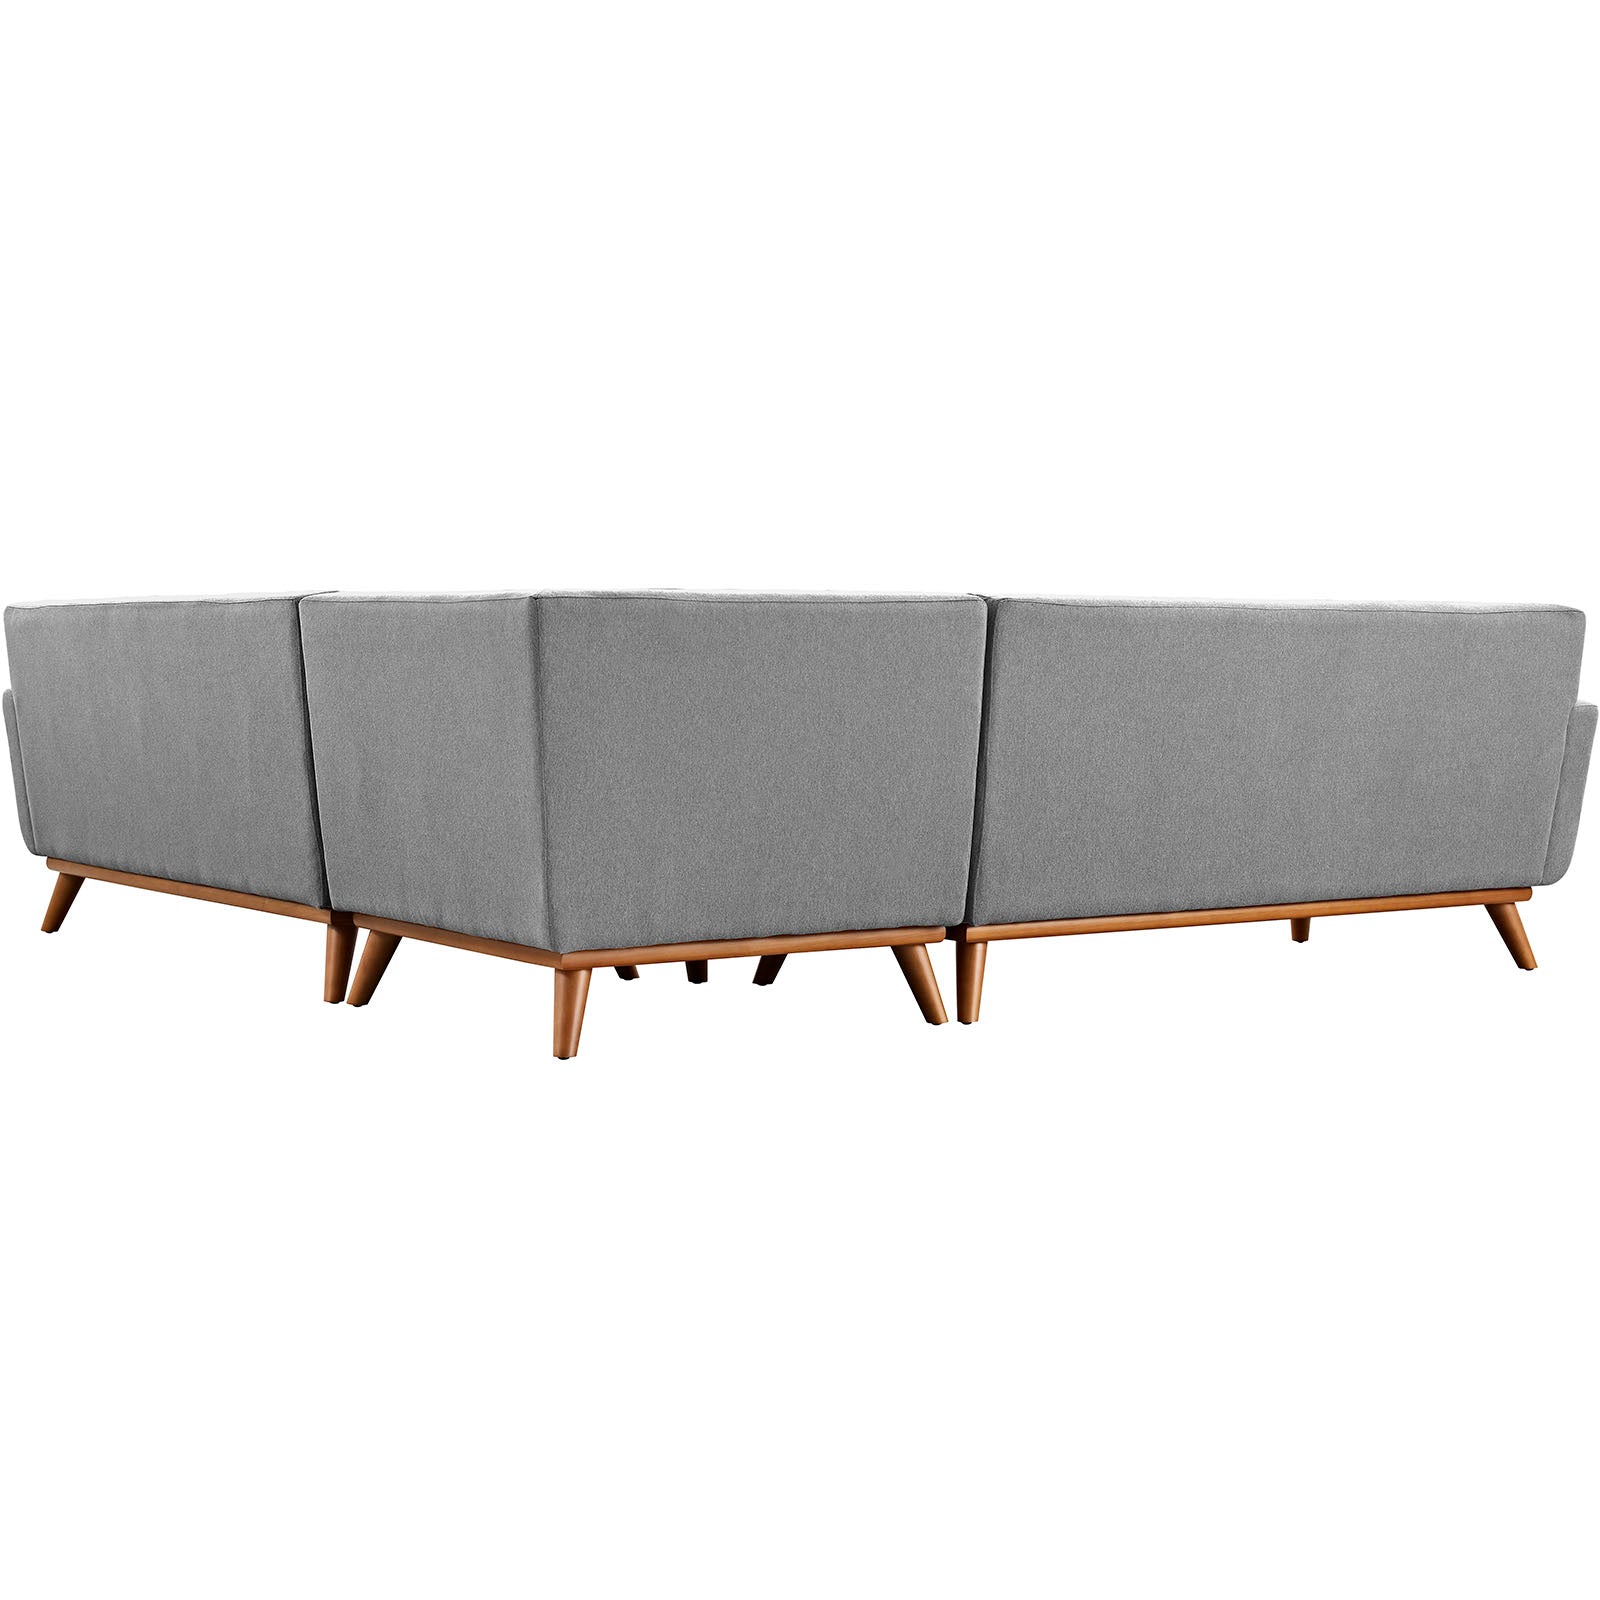 Engage L-Shaped Sectional Sofa - East Shore Modern Home Furnishings